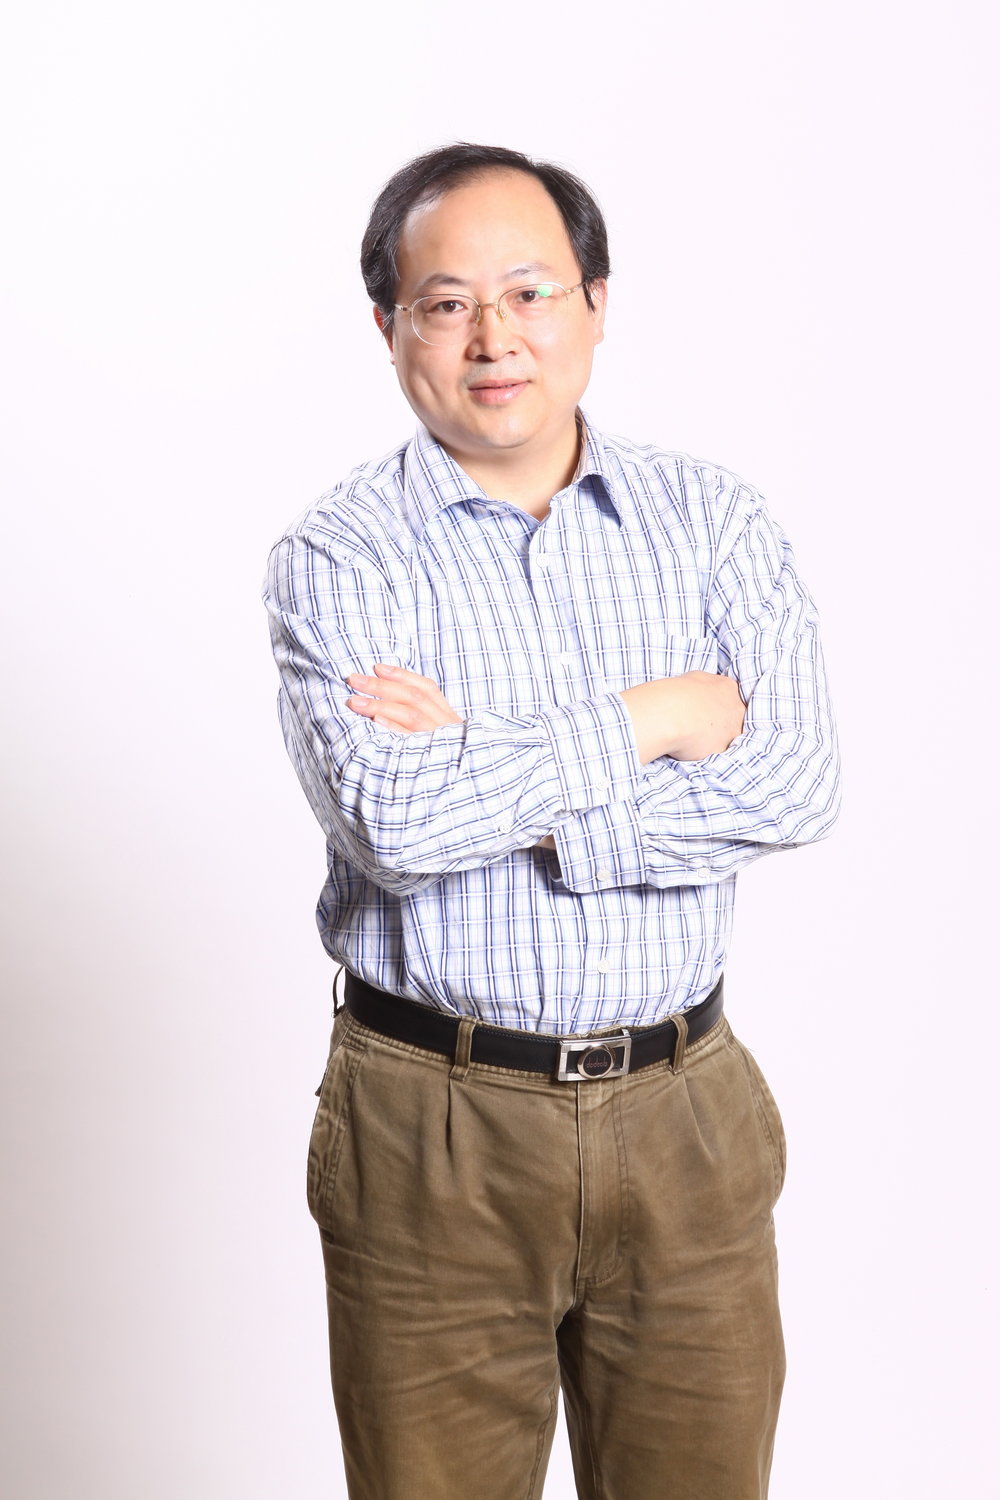 Chinese Plastic and Reconstructive Surgeon Sufan Wu, M.D., Ph.D